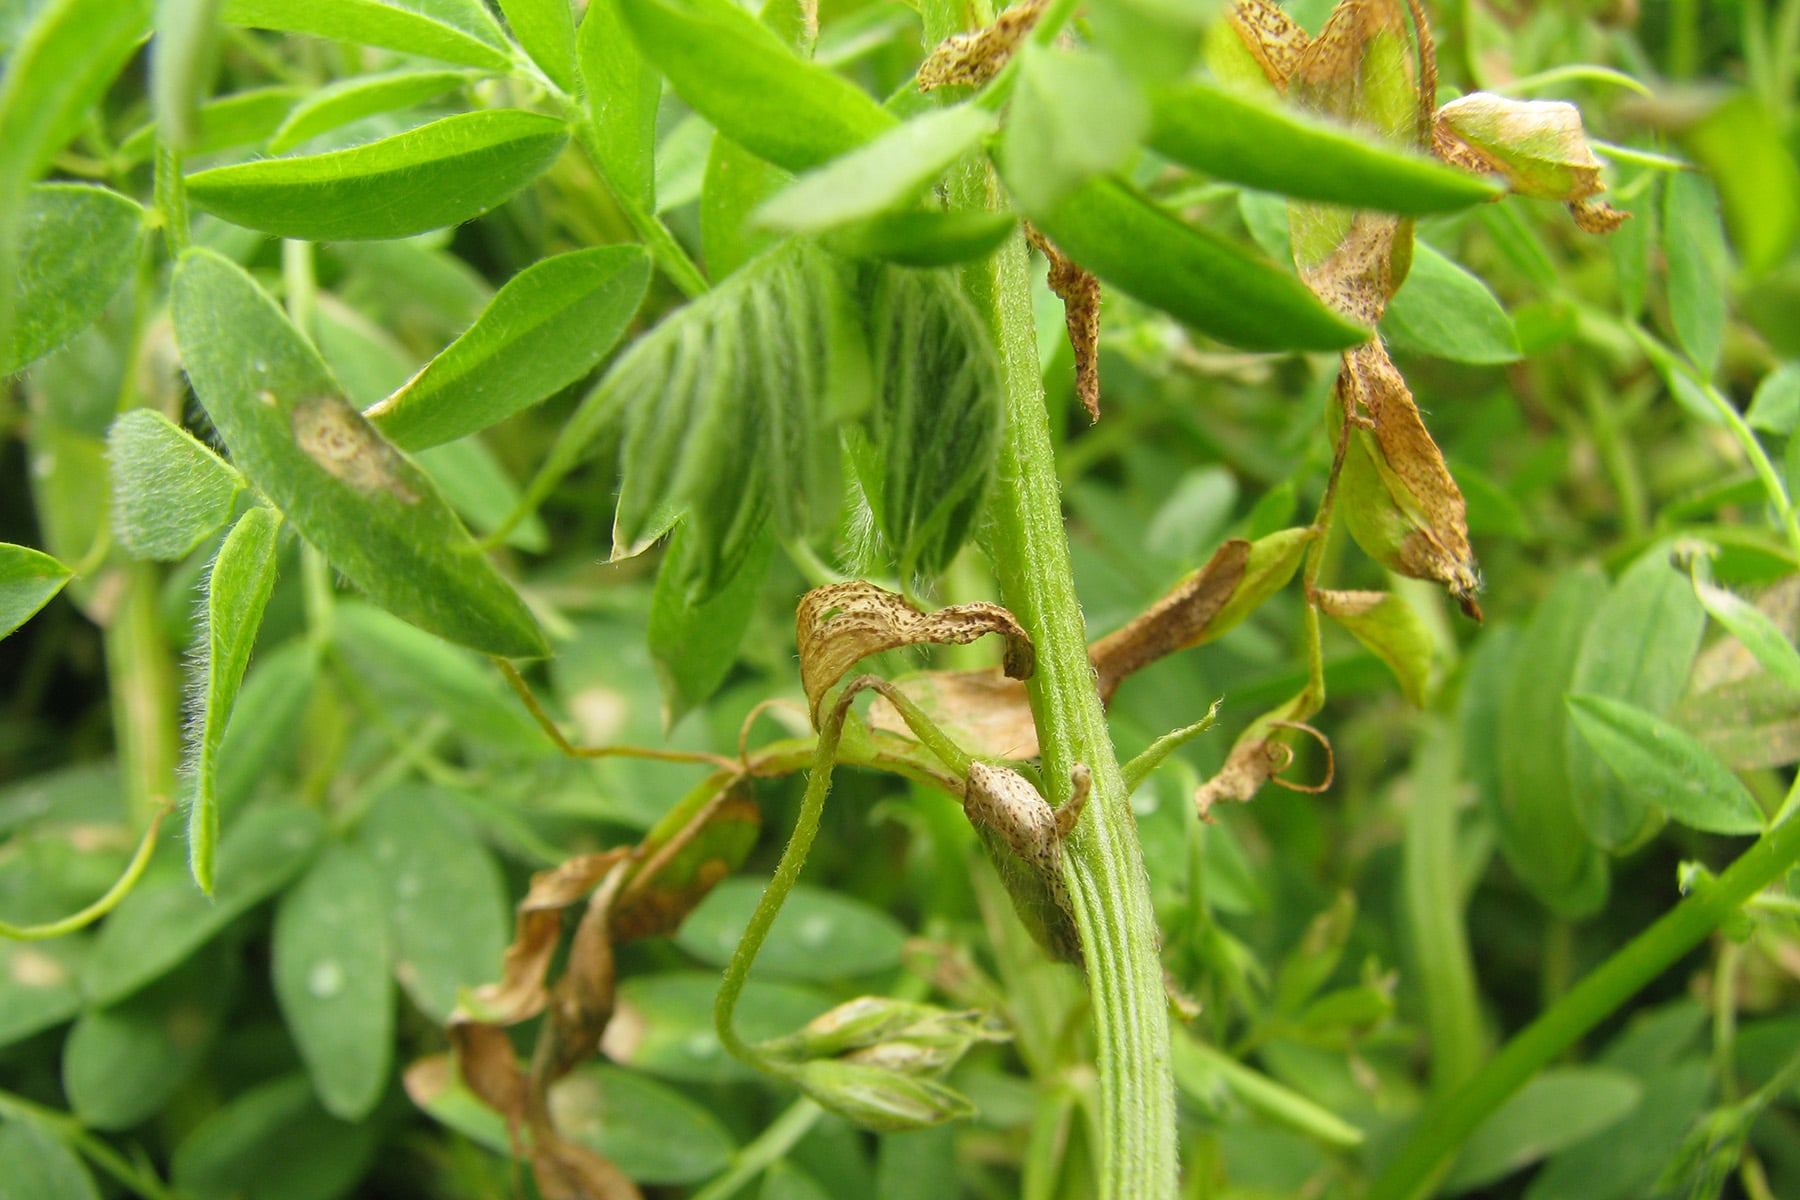 Resistance monitoring of ascochyta blight in lentils (S1208)